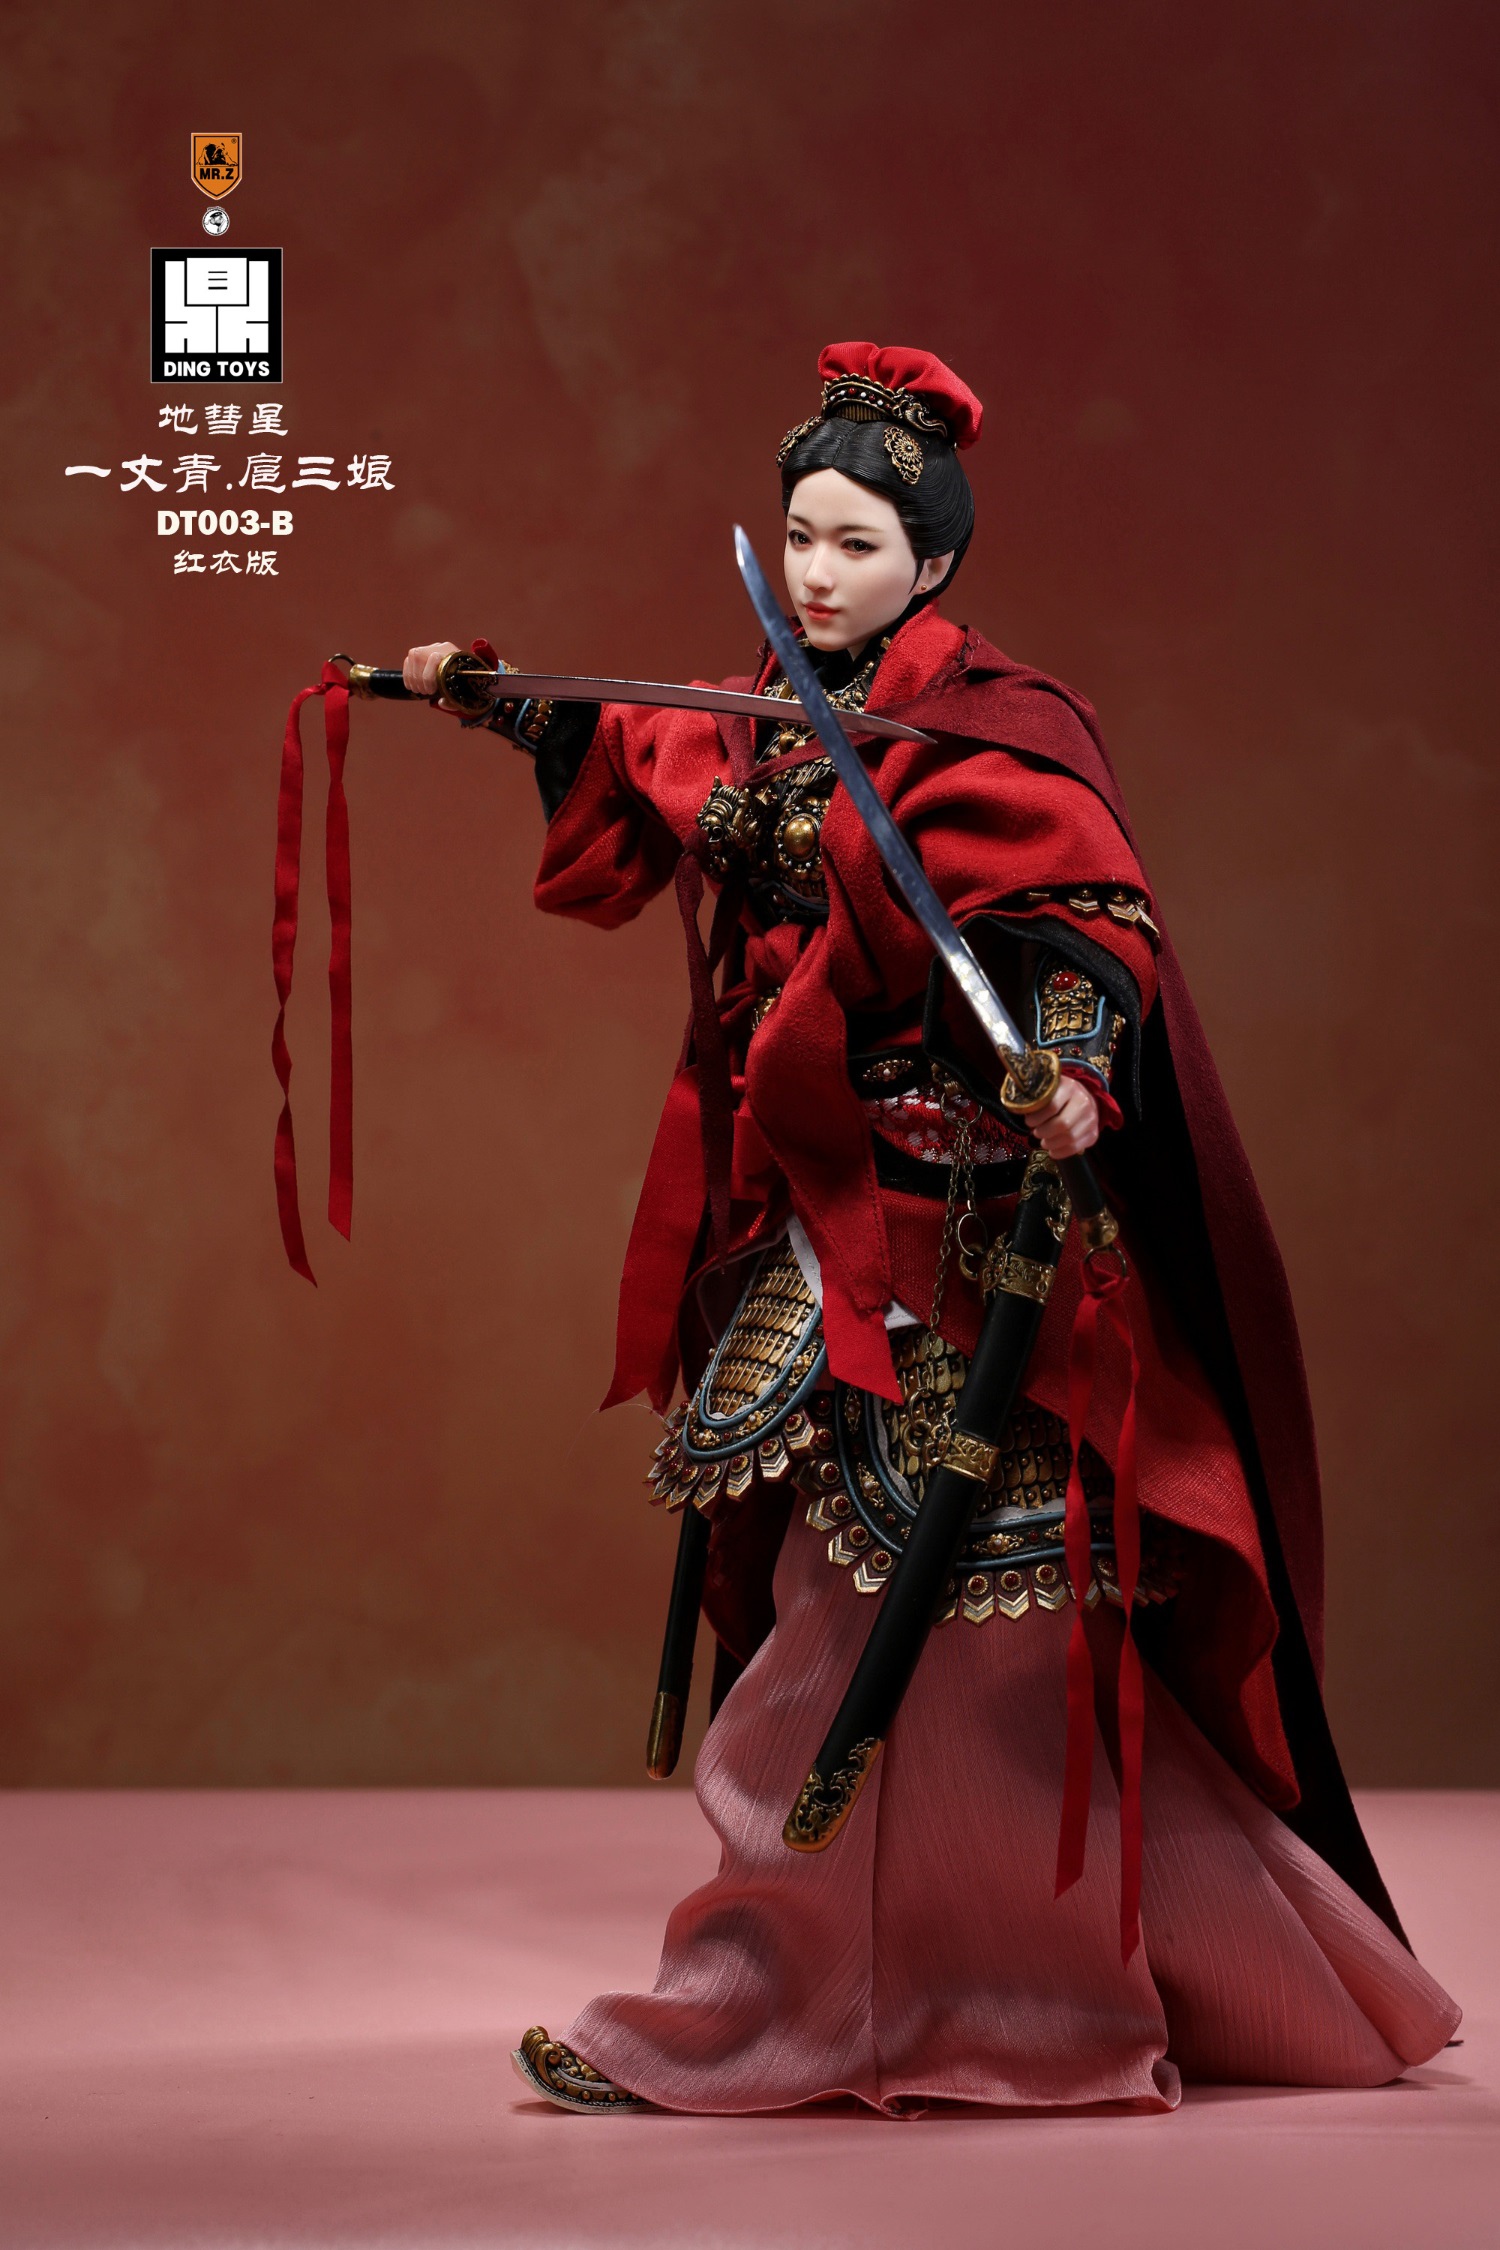 MrZ - NEW PRODUCT: Mr.Z x Ding Toys DT003 1/6 Scale 《Water Margin》Shiying Zhang (Green and Red versions), Horse (White) 2746